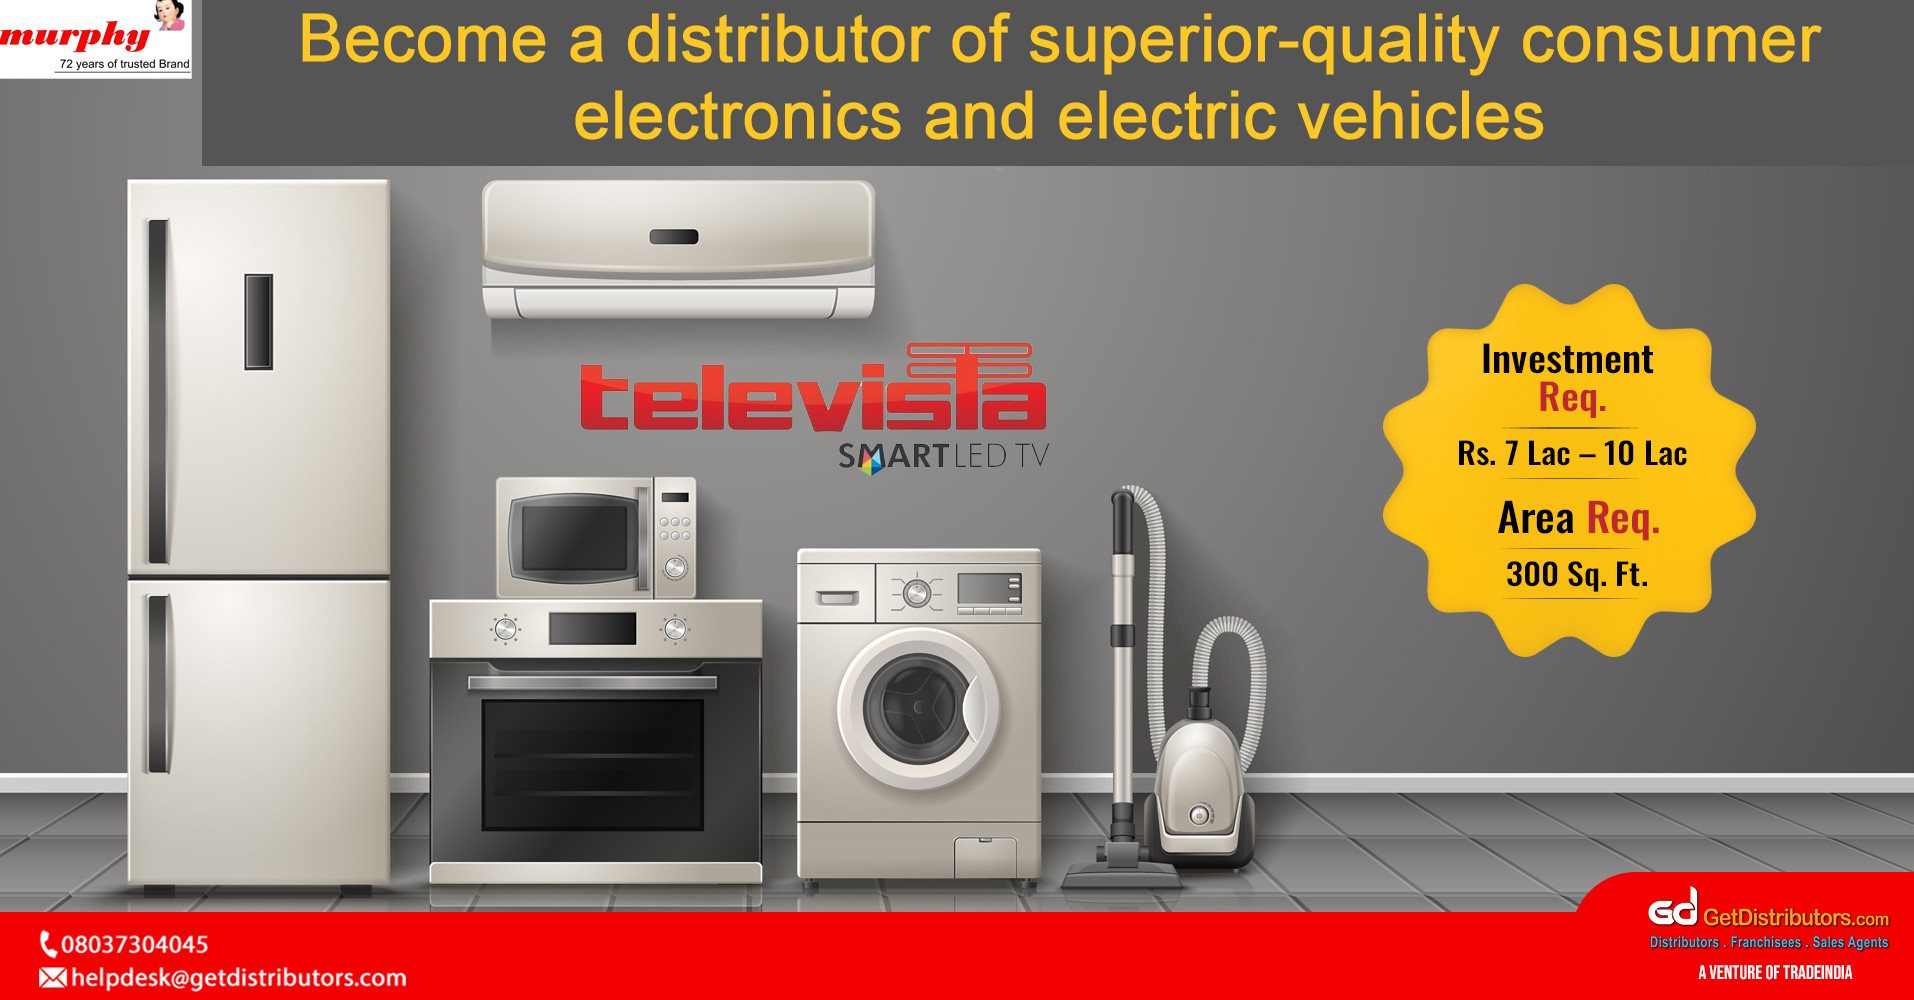 Become a distributor of superior-quality consumer electronics and electric vehicles